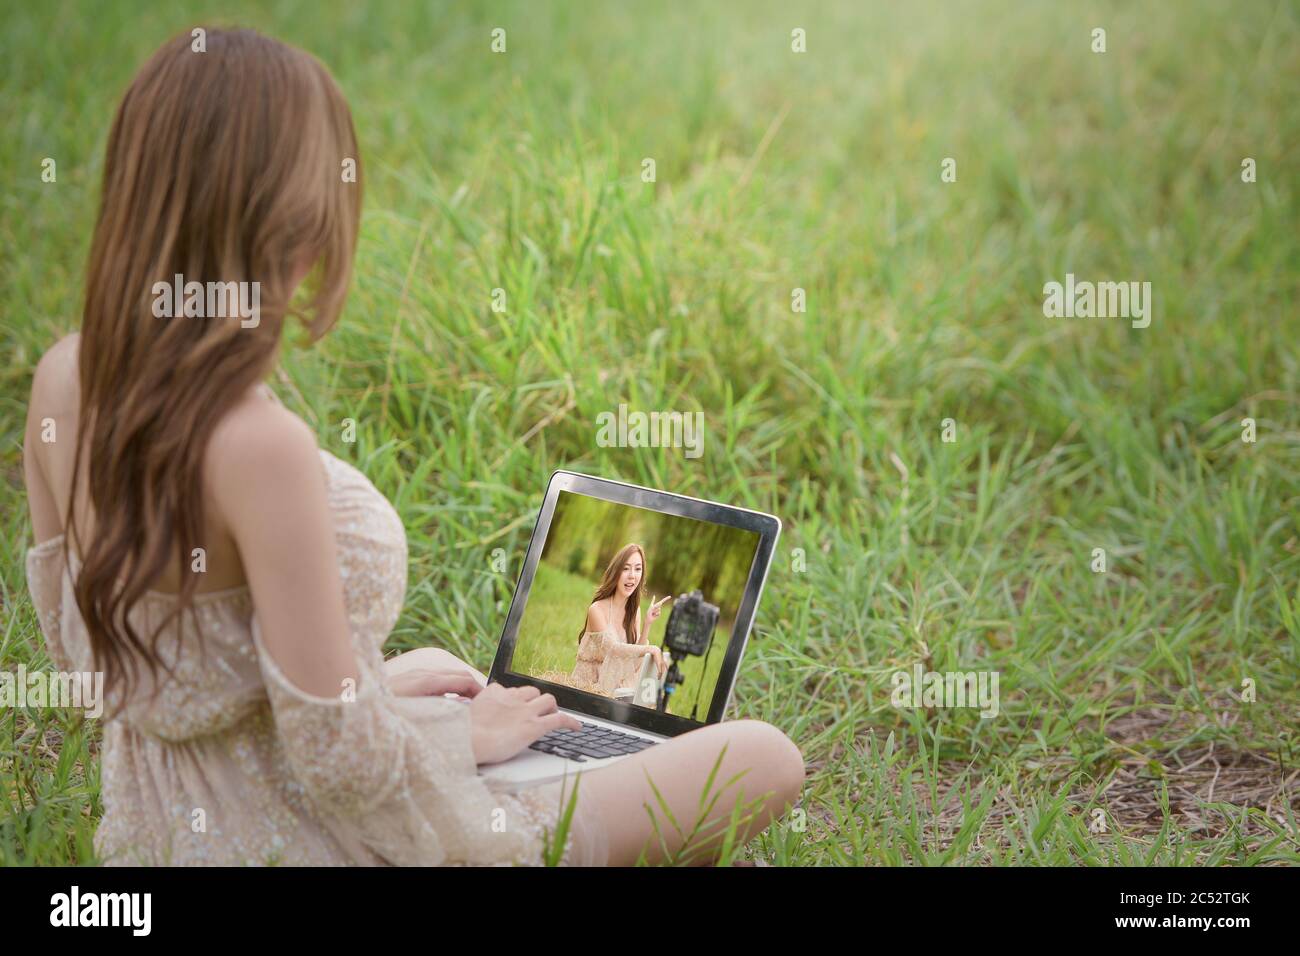 Woman sitting in a field reviewing vlogging filming, Thailand Stock Photo